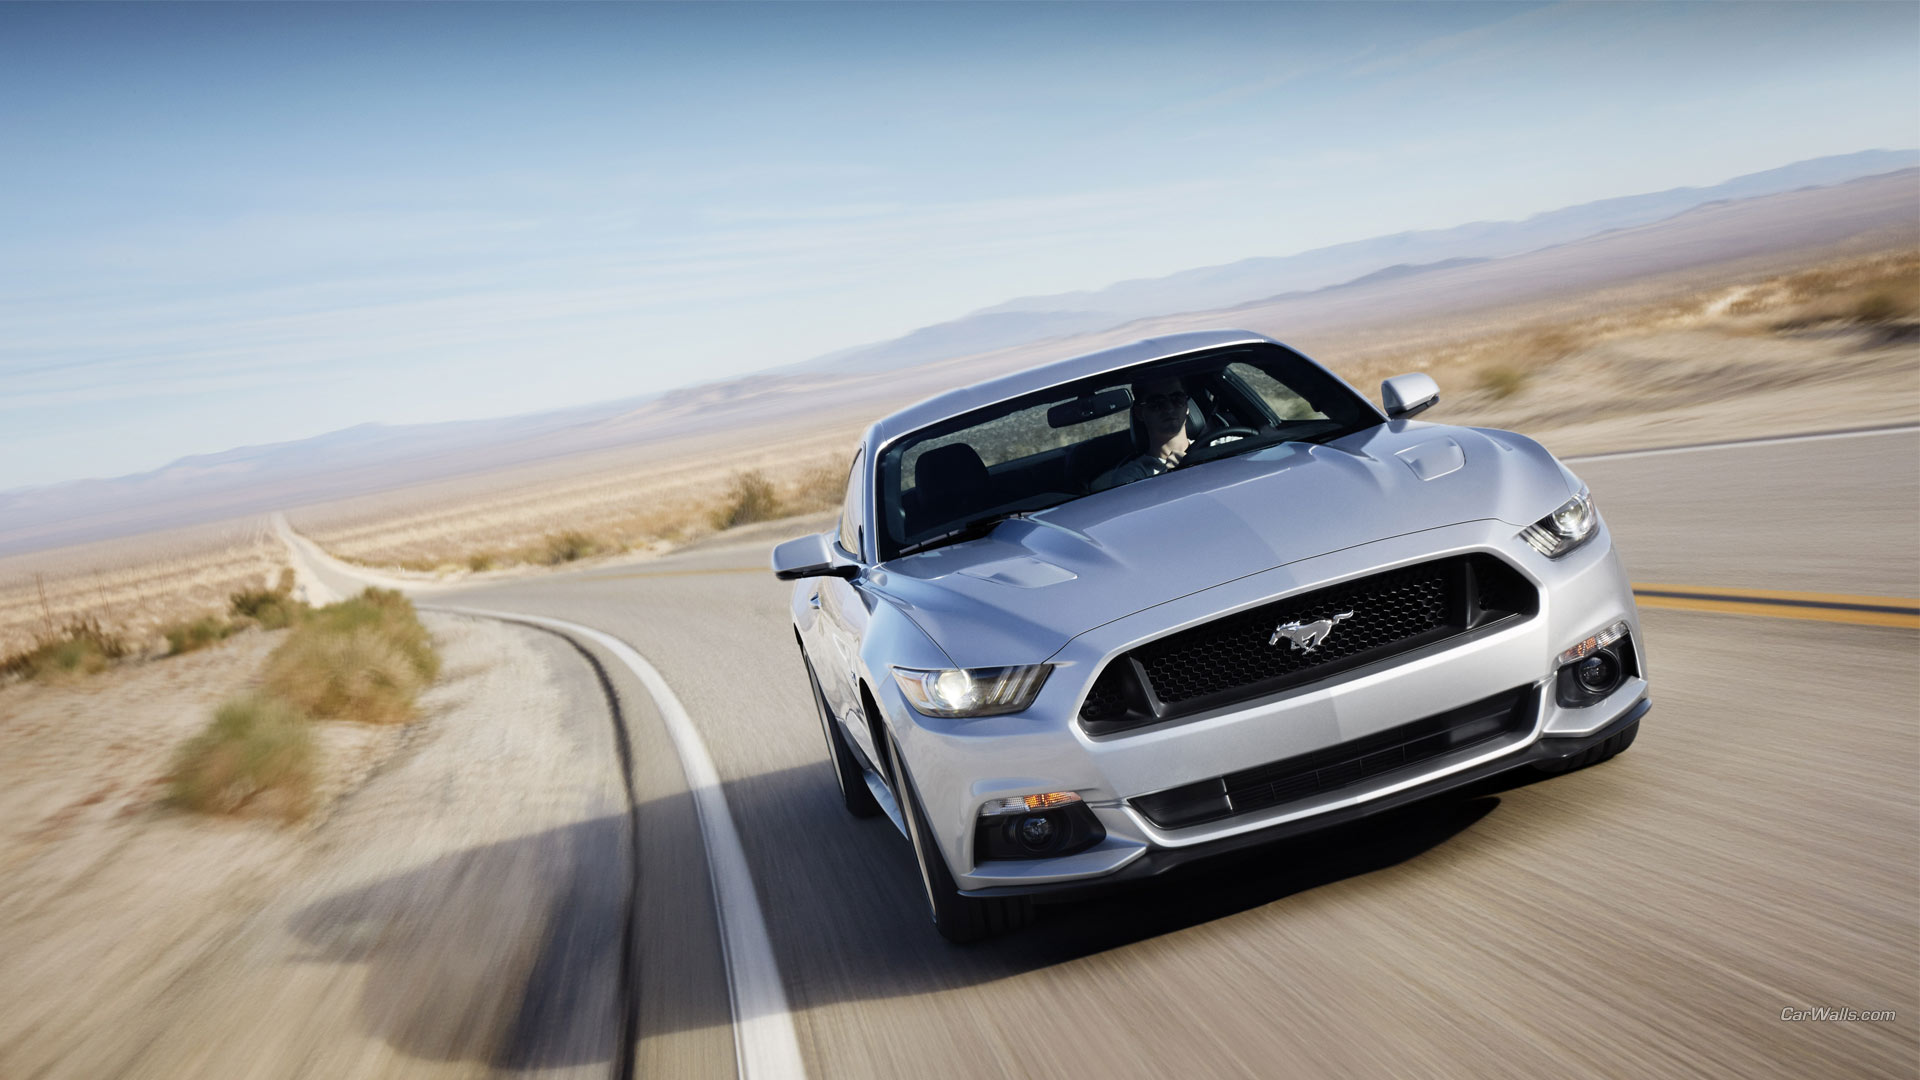 Vehicles 2015 Ford Mustang GT HD Wallpaper | Background Image